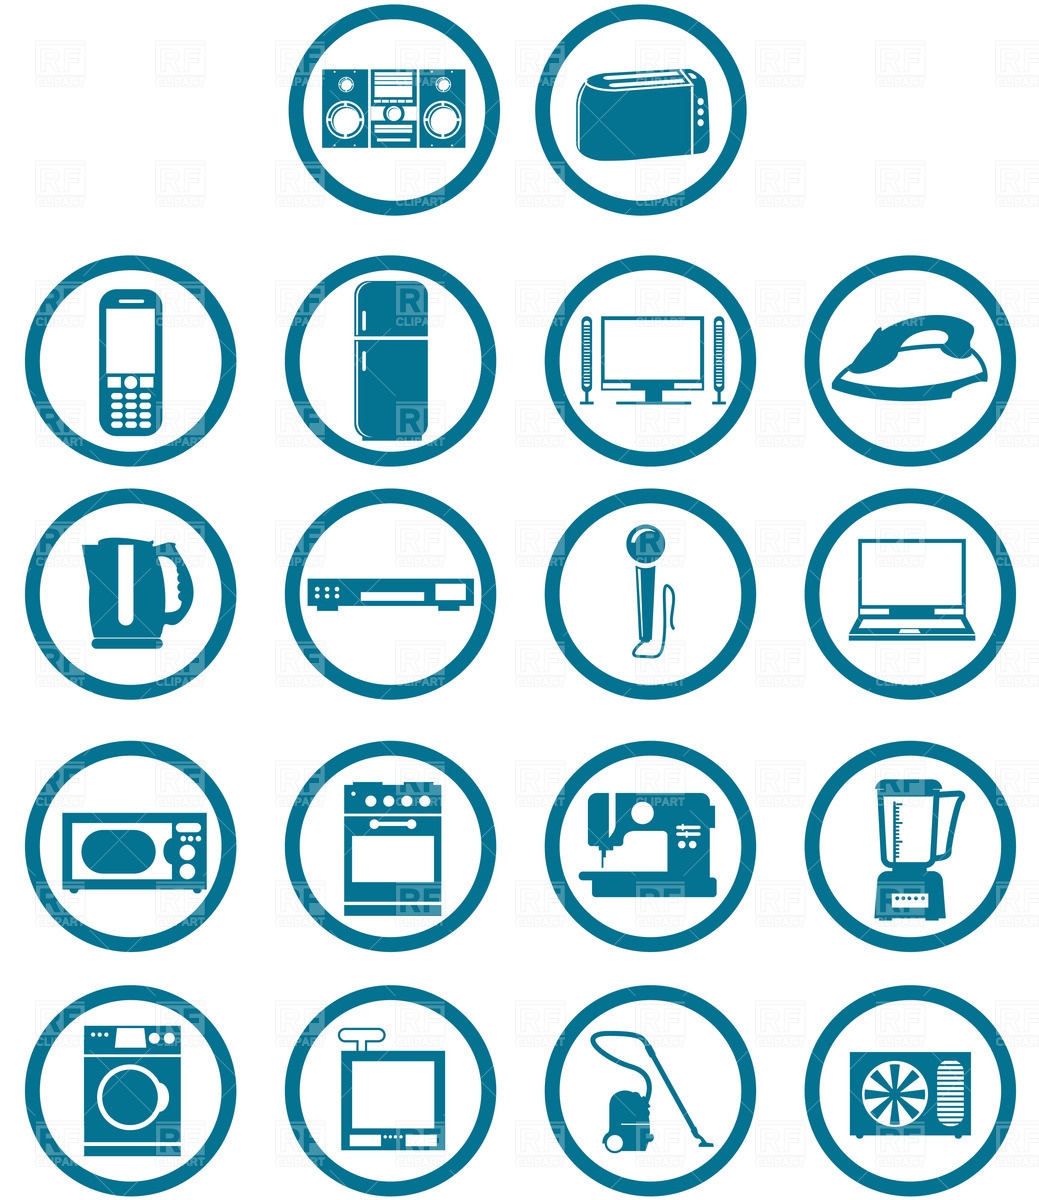 Home appliances clipart free download.